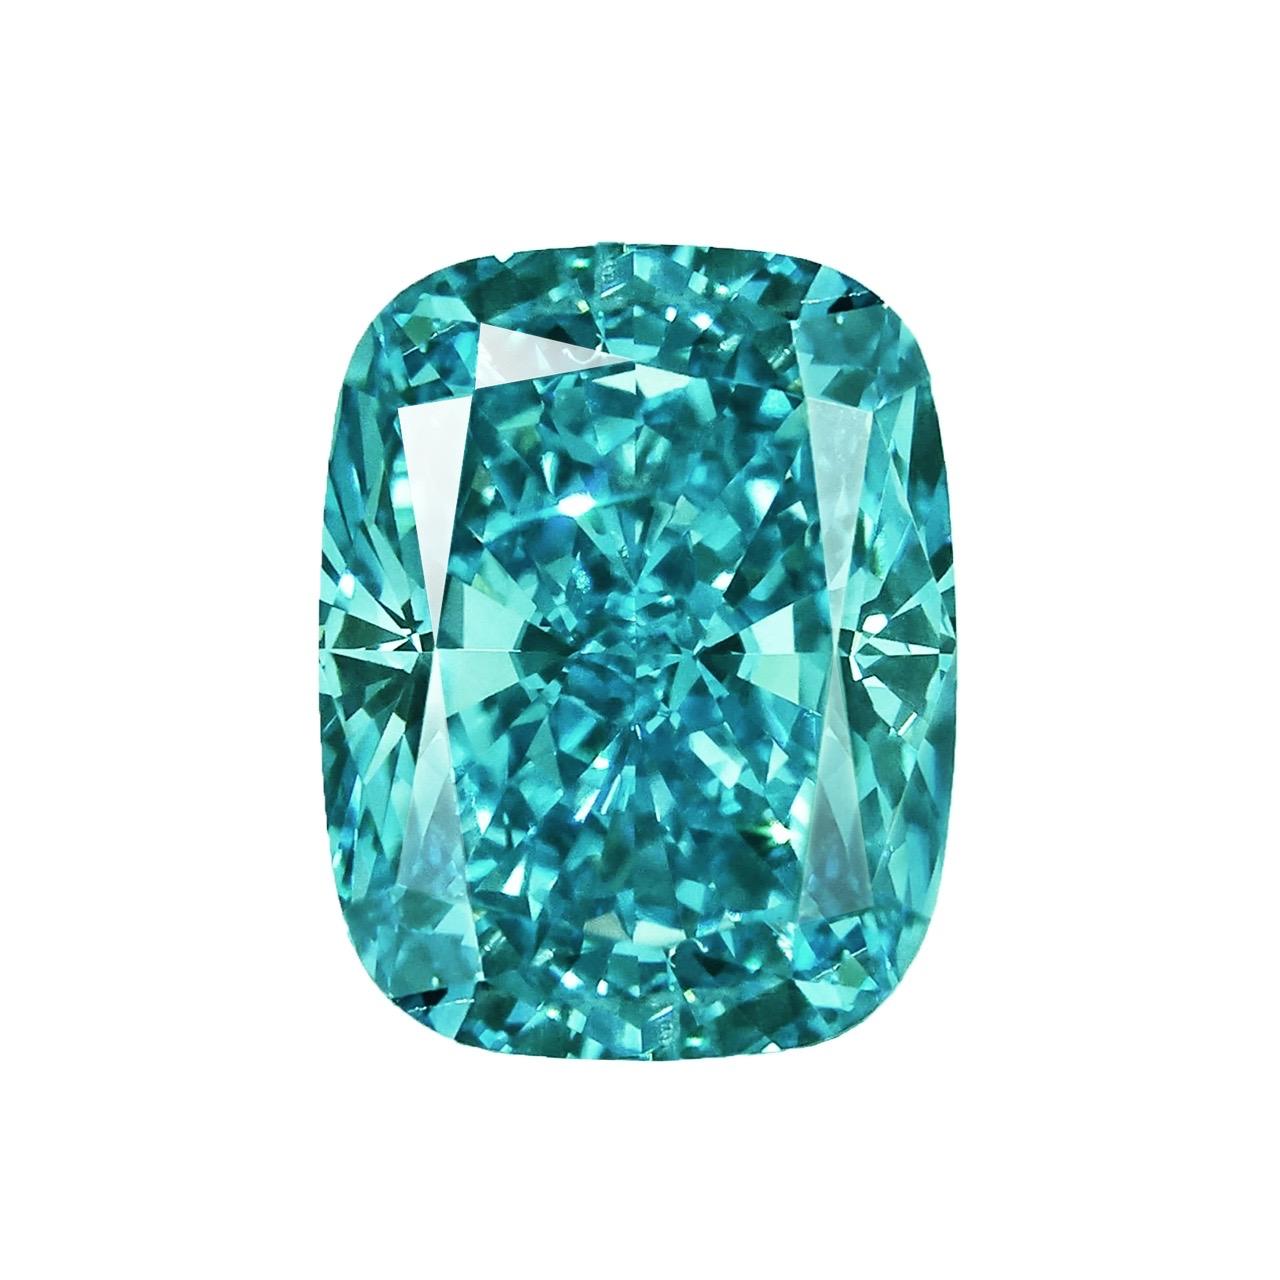 From well known dealer wholesaler Emilio Jewelry Located on New York's iconic Fifth Avenue,
Main stone: 0.75 carat Fancy Vivid Green-Blue 
We can custom make your dream ring for this spectacular investment diamond. 
The causes of green and